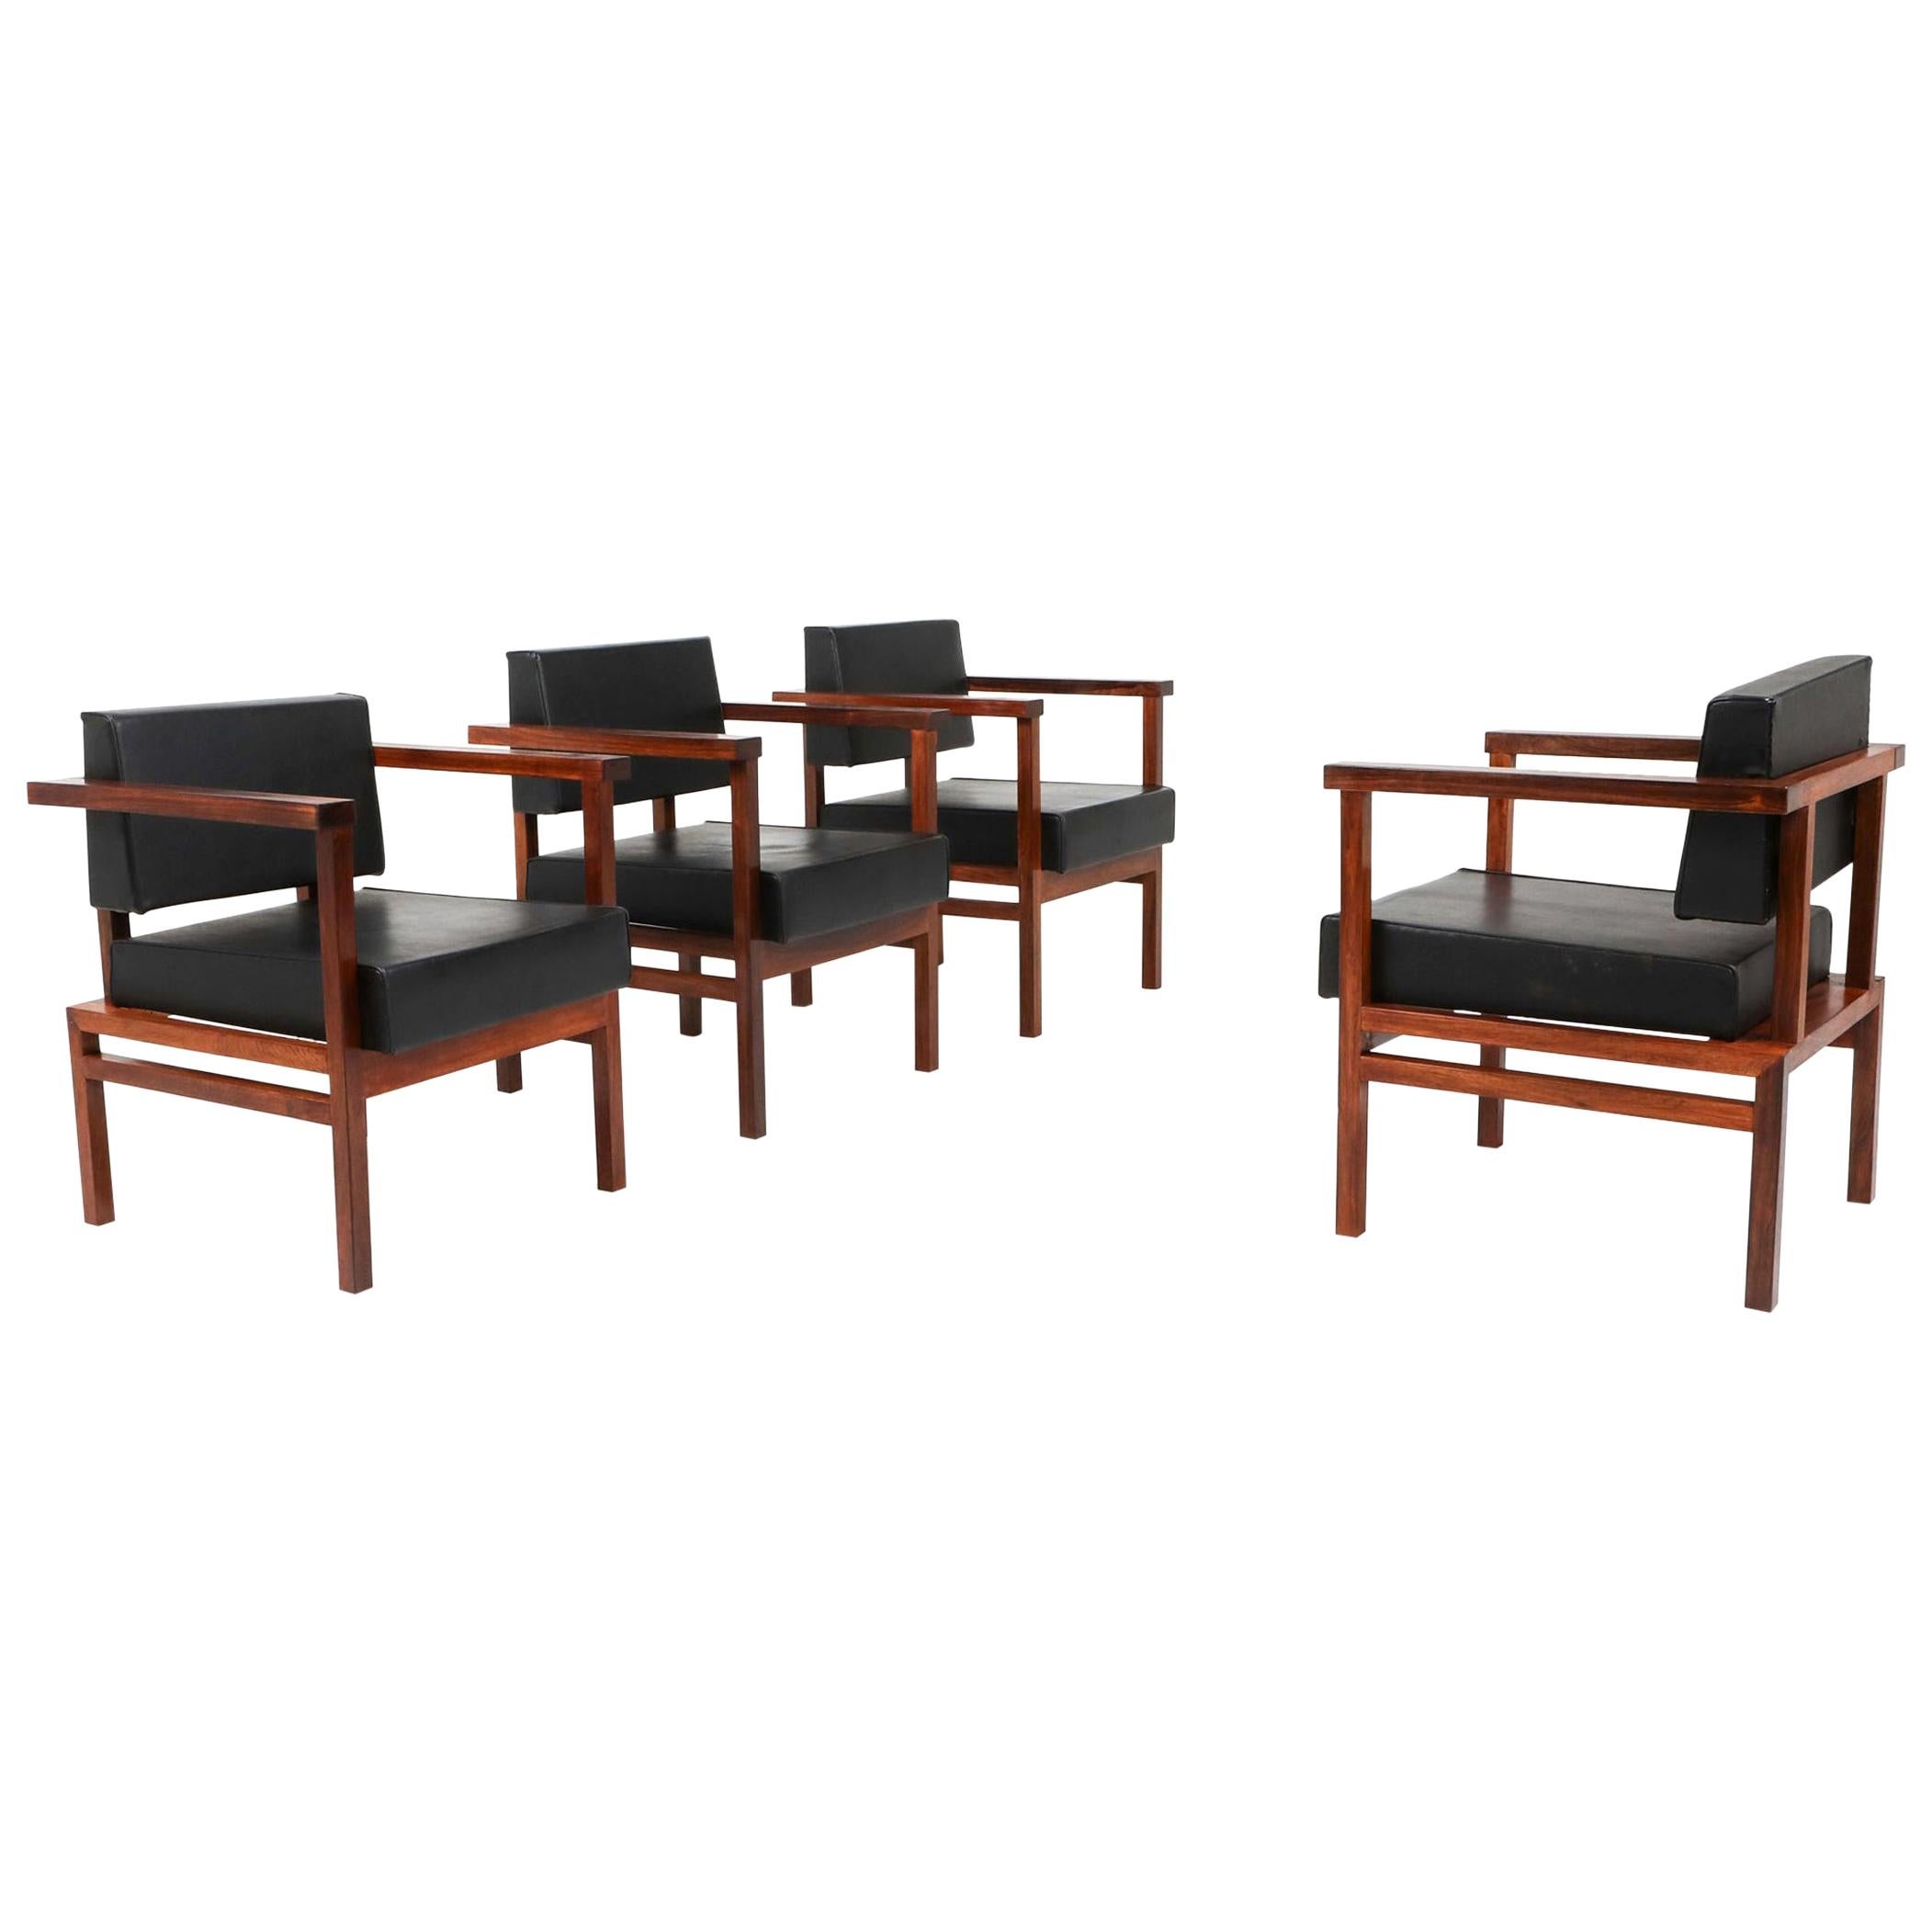 Wim Den Boon Executive Chairs in Black Leather and Rosewood